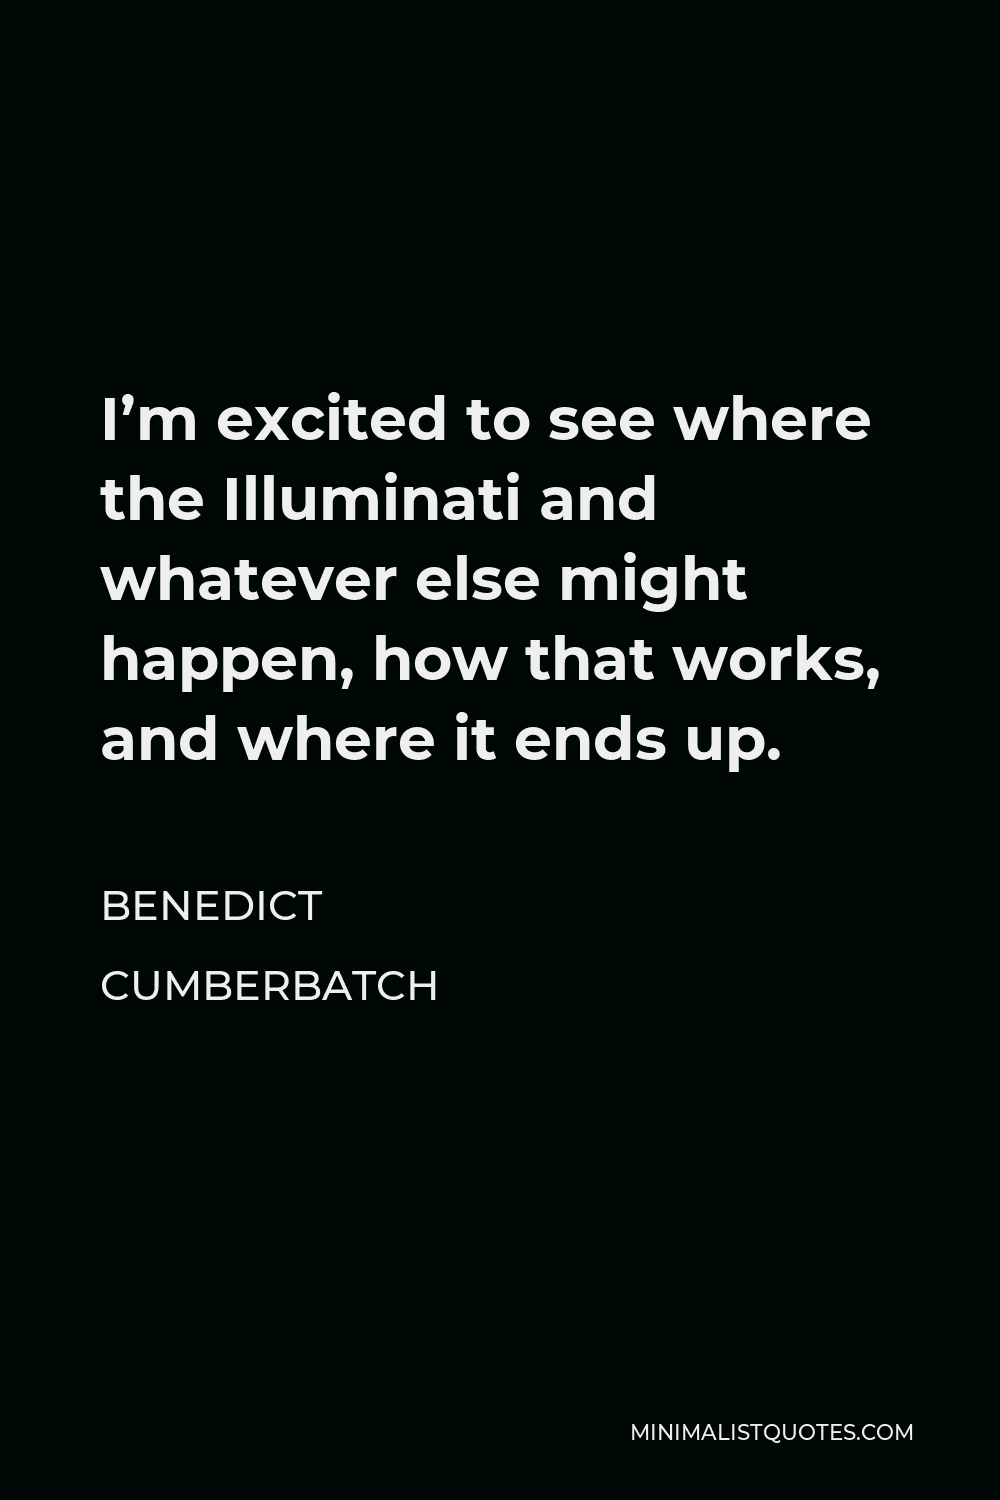 Benedict Cumberbatch Quote - I’m excited to see where the Illuminati and whatever else might happen, how that works, and where it ends up.